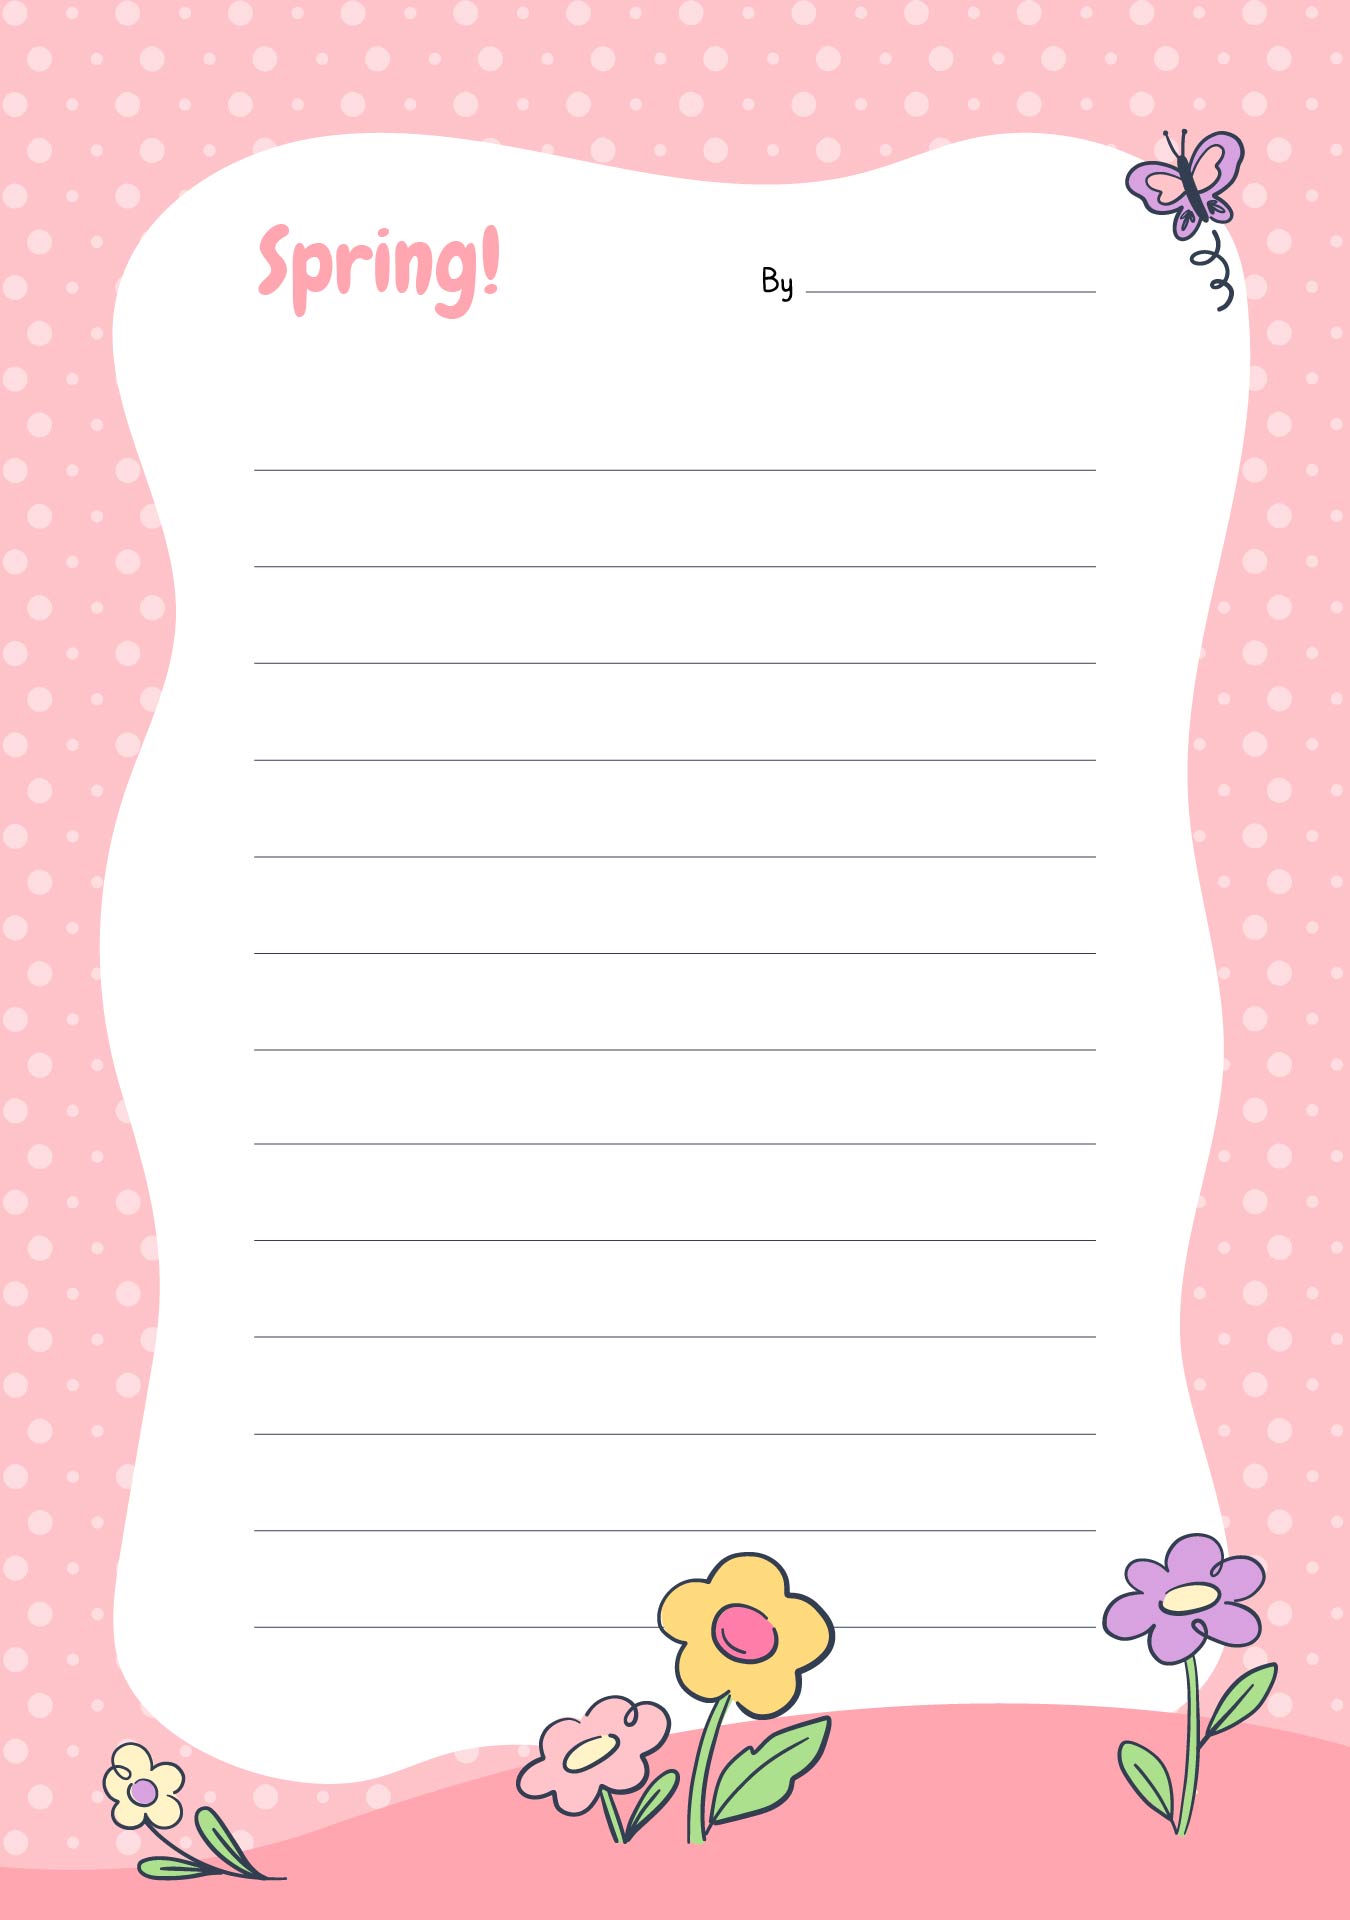 5 Best Images Of Spring Writing Paper Printable Free Printable Border 